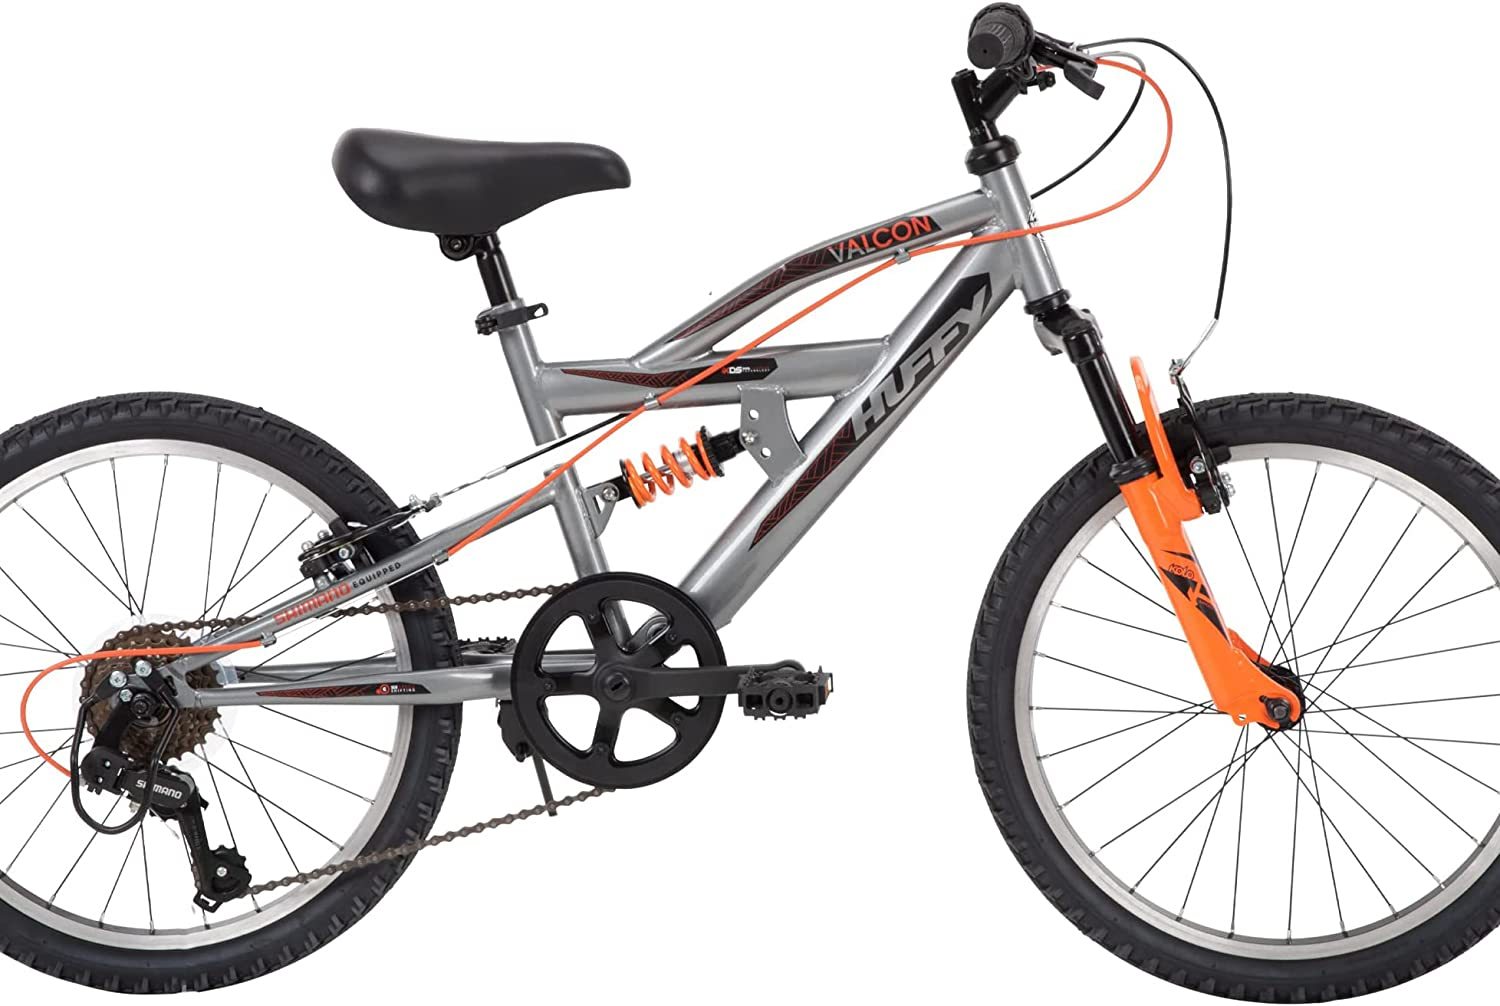 Boys' Huffy Valcon 20" Mountain Bike With Dual Suspension, Silver And Orange. - $298.93